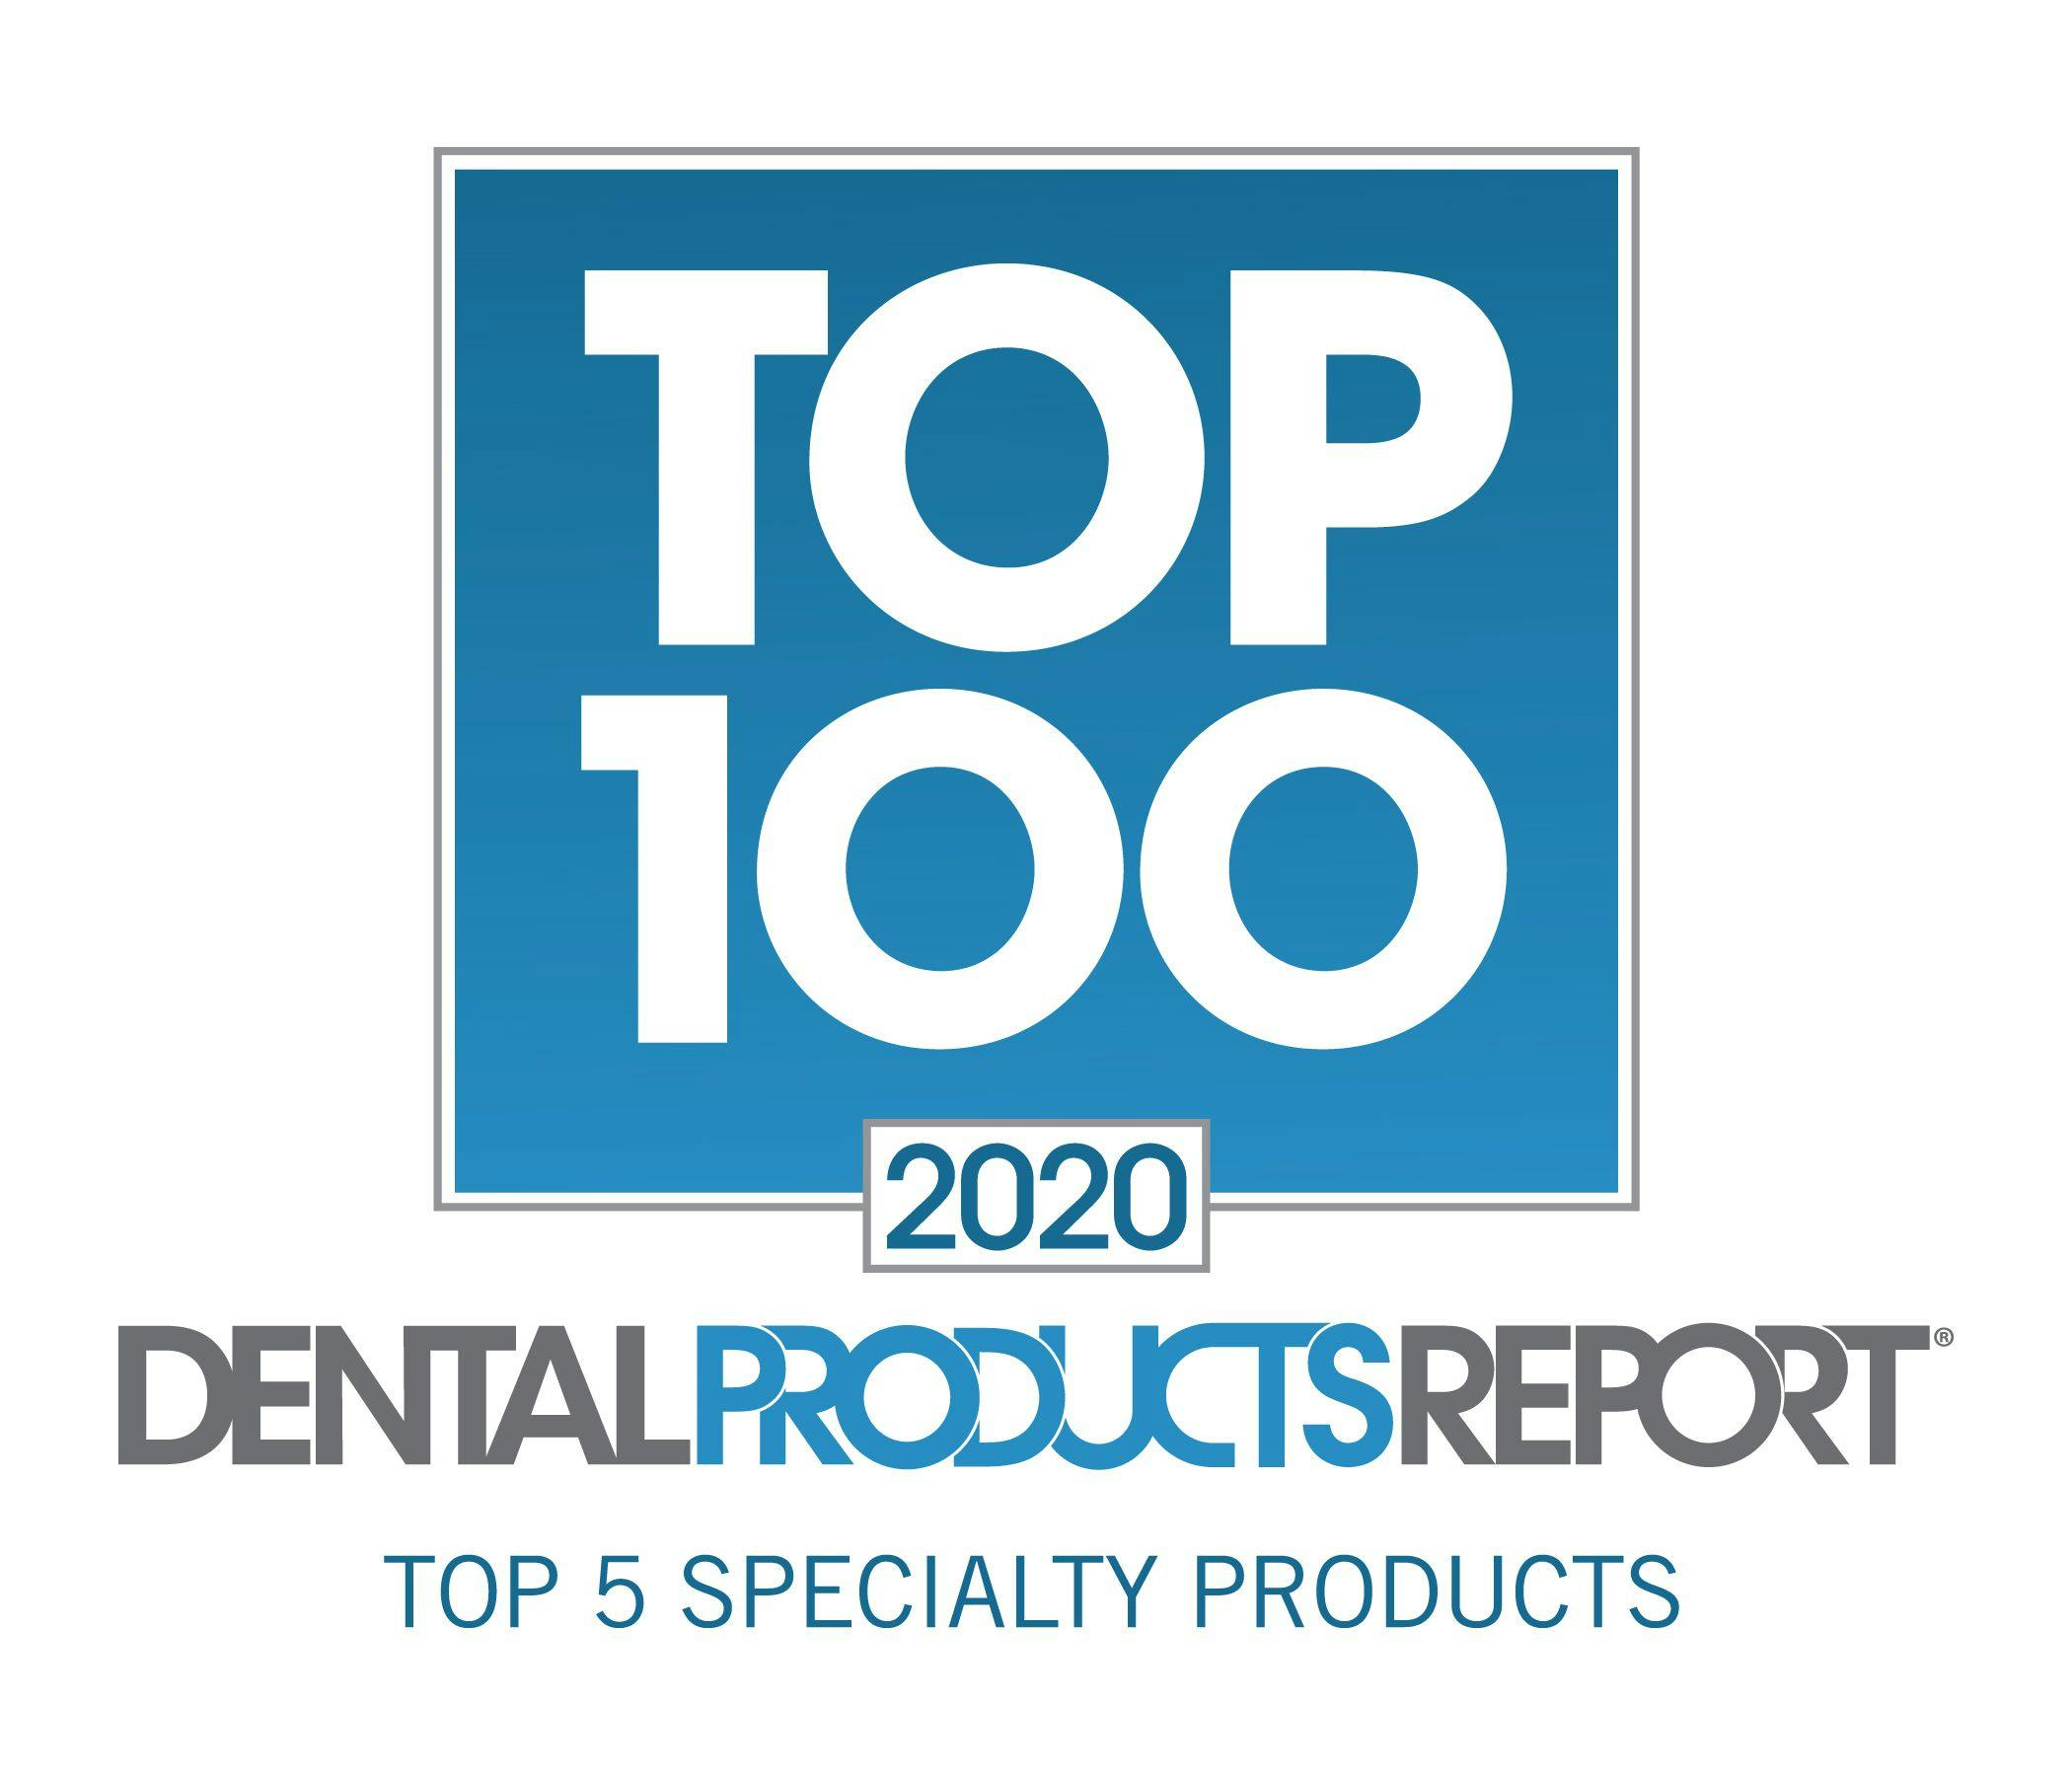 Top 5 Dental Specialty Products of 2020